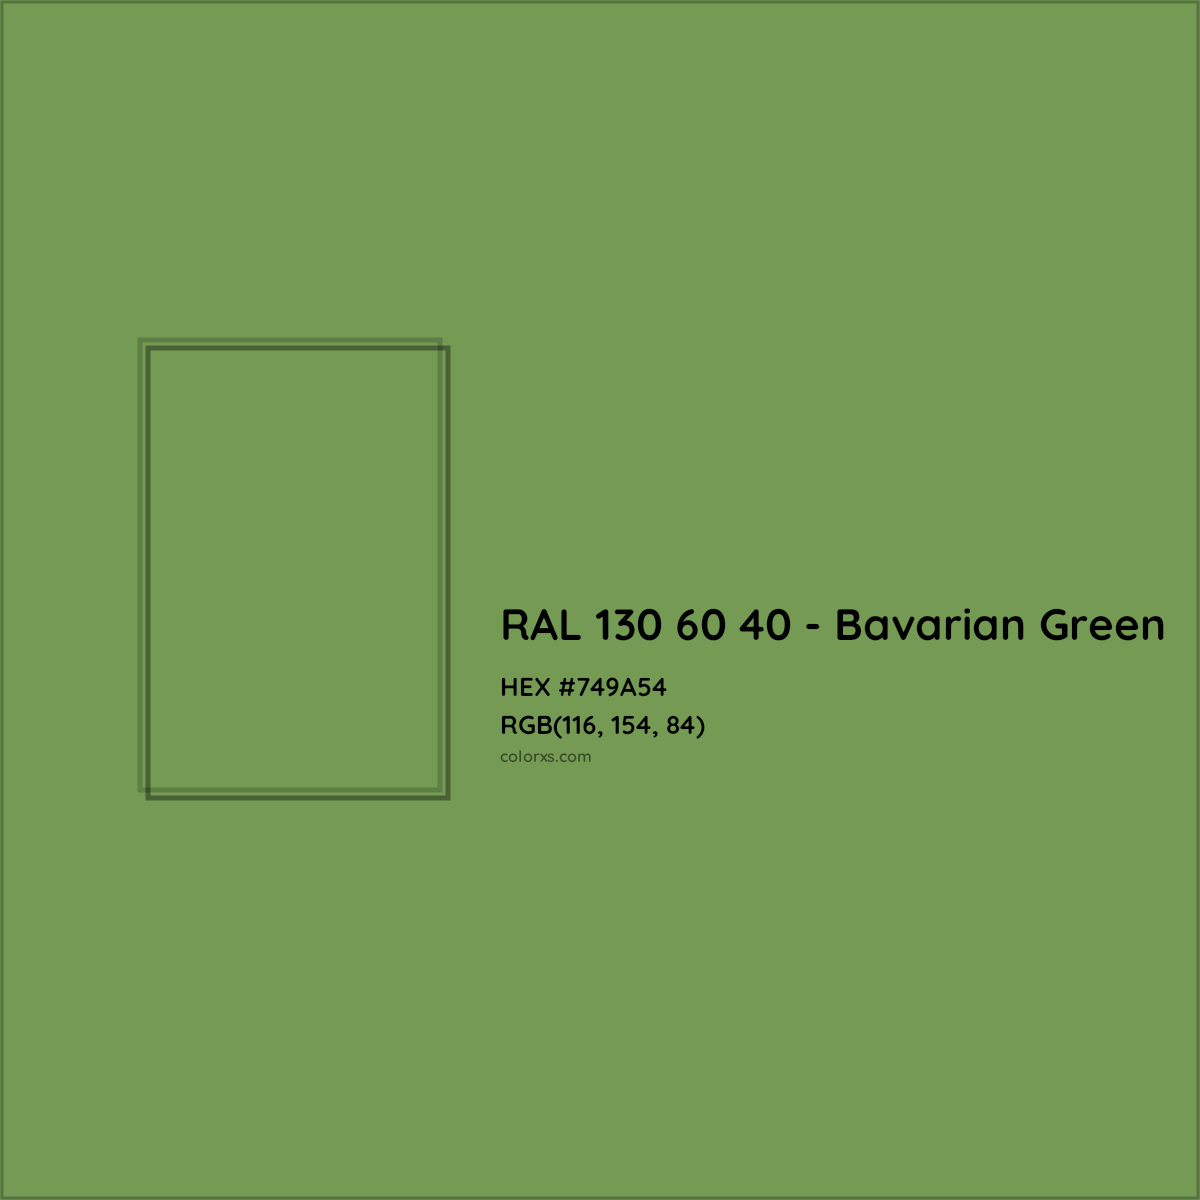 HEX #749A54 RAL 130 60 40 - Bavarian Green CMS RAL Design - Color Code